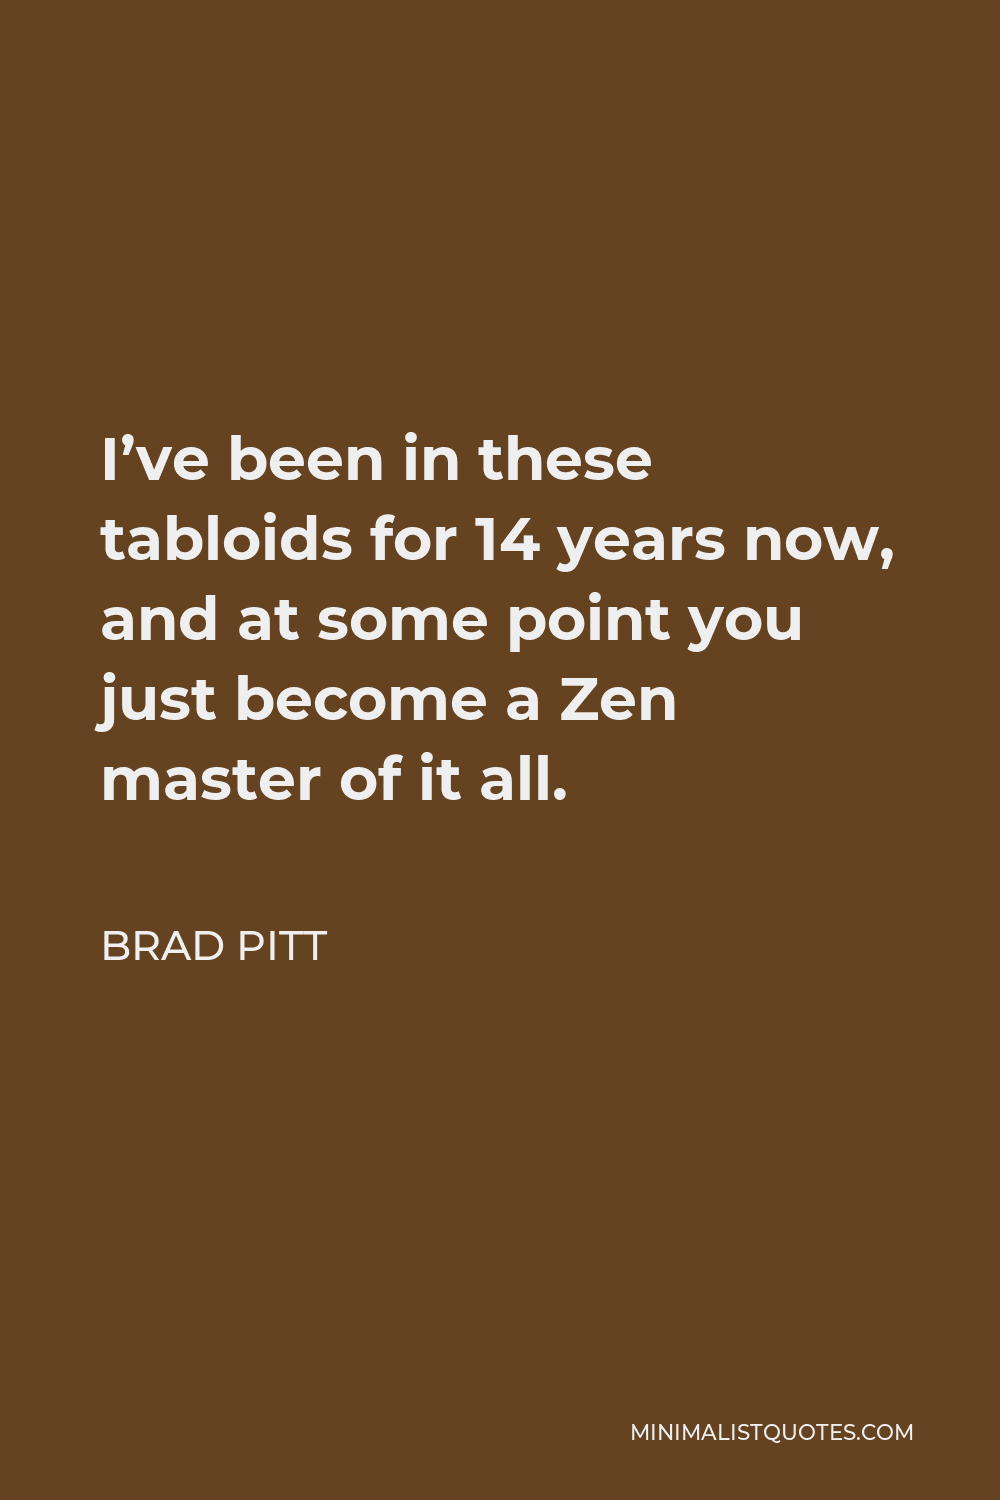 Brad Pitt Quote - I’ve been in these tabloids for 14 years now, and at some point you just become a Zen master of it all.